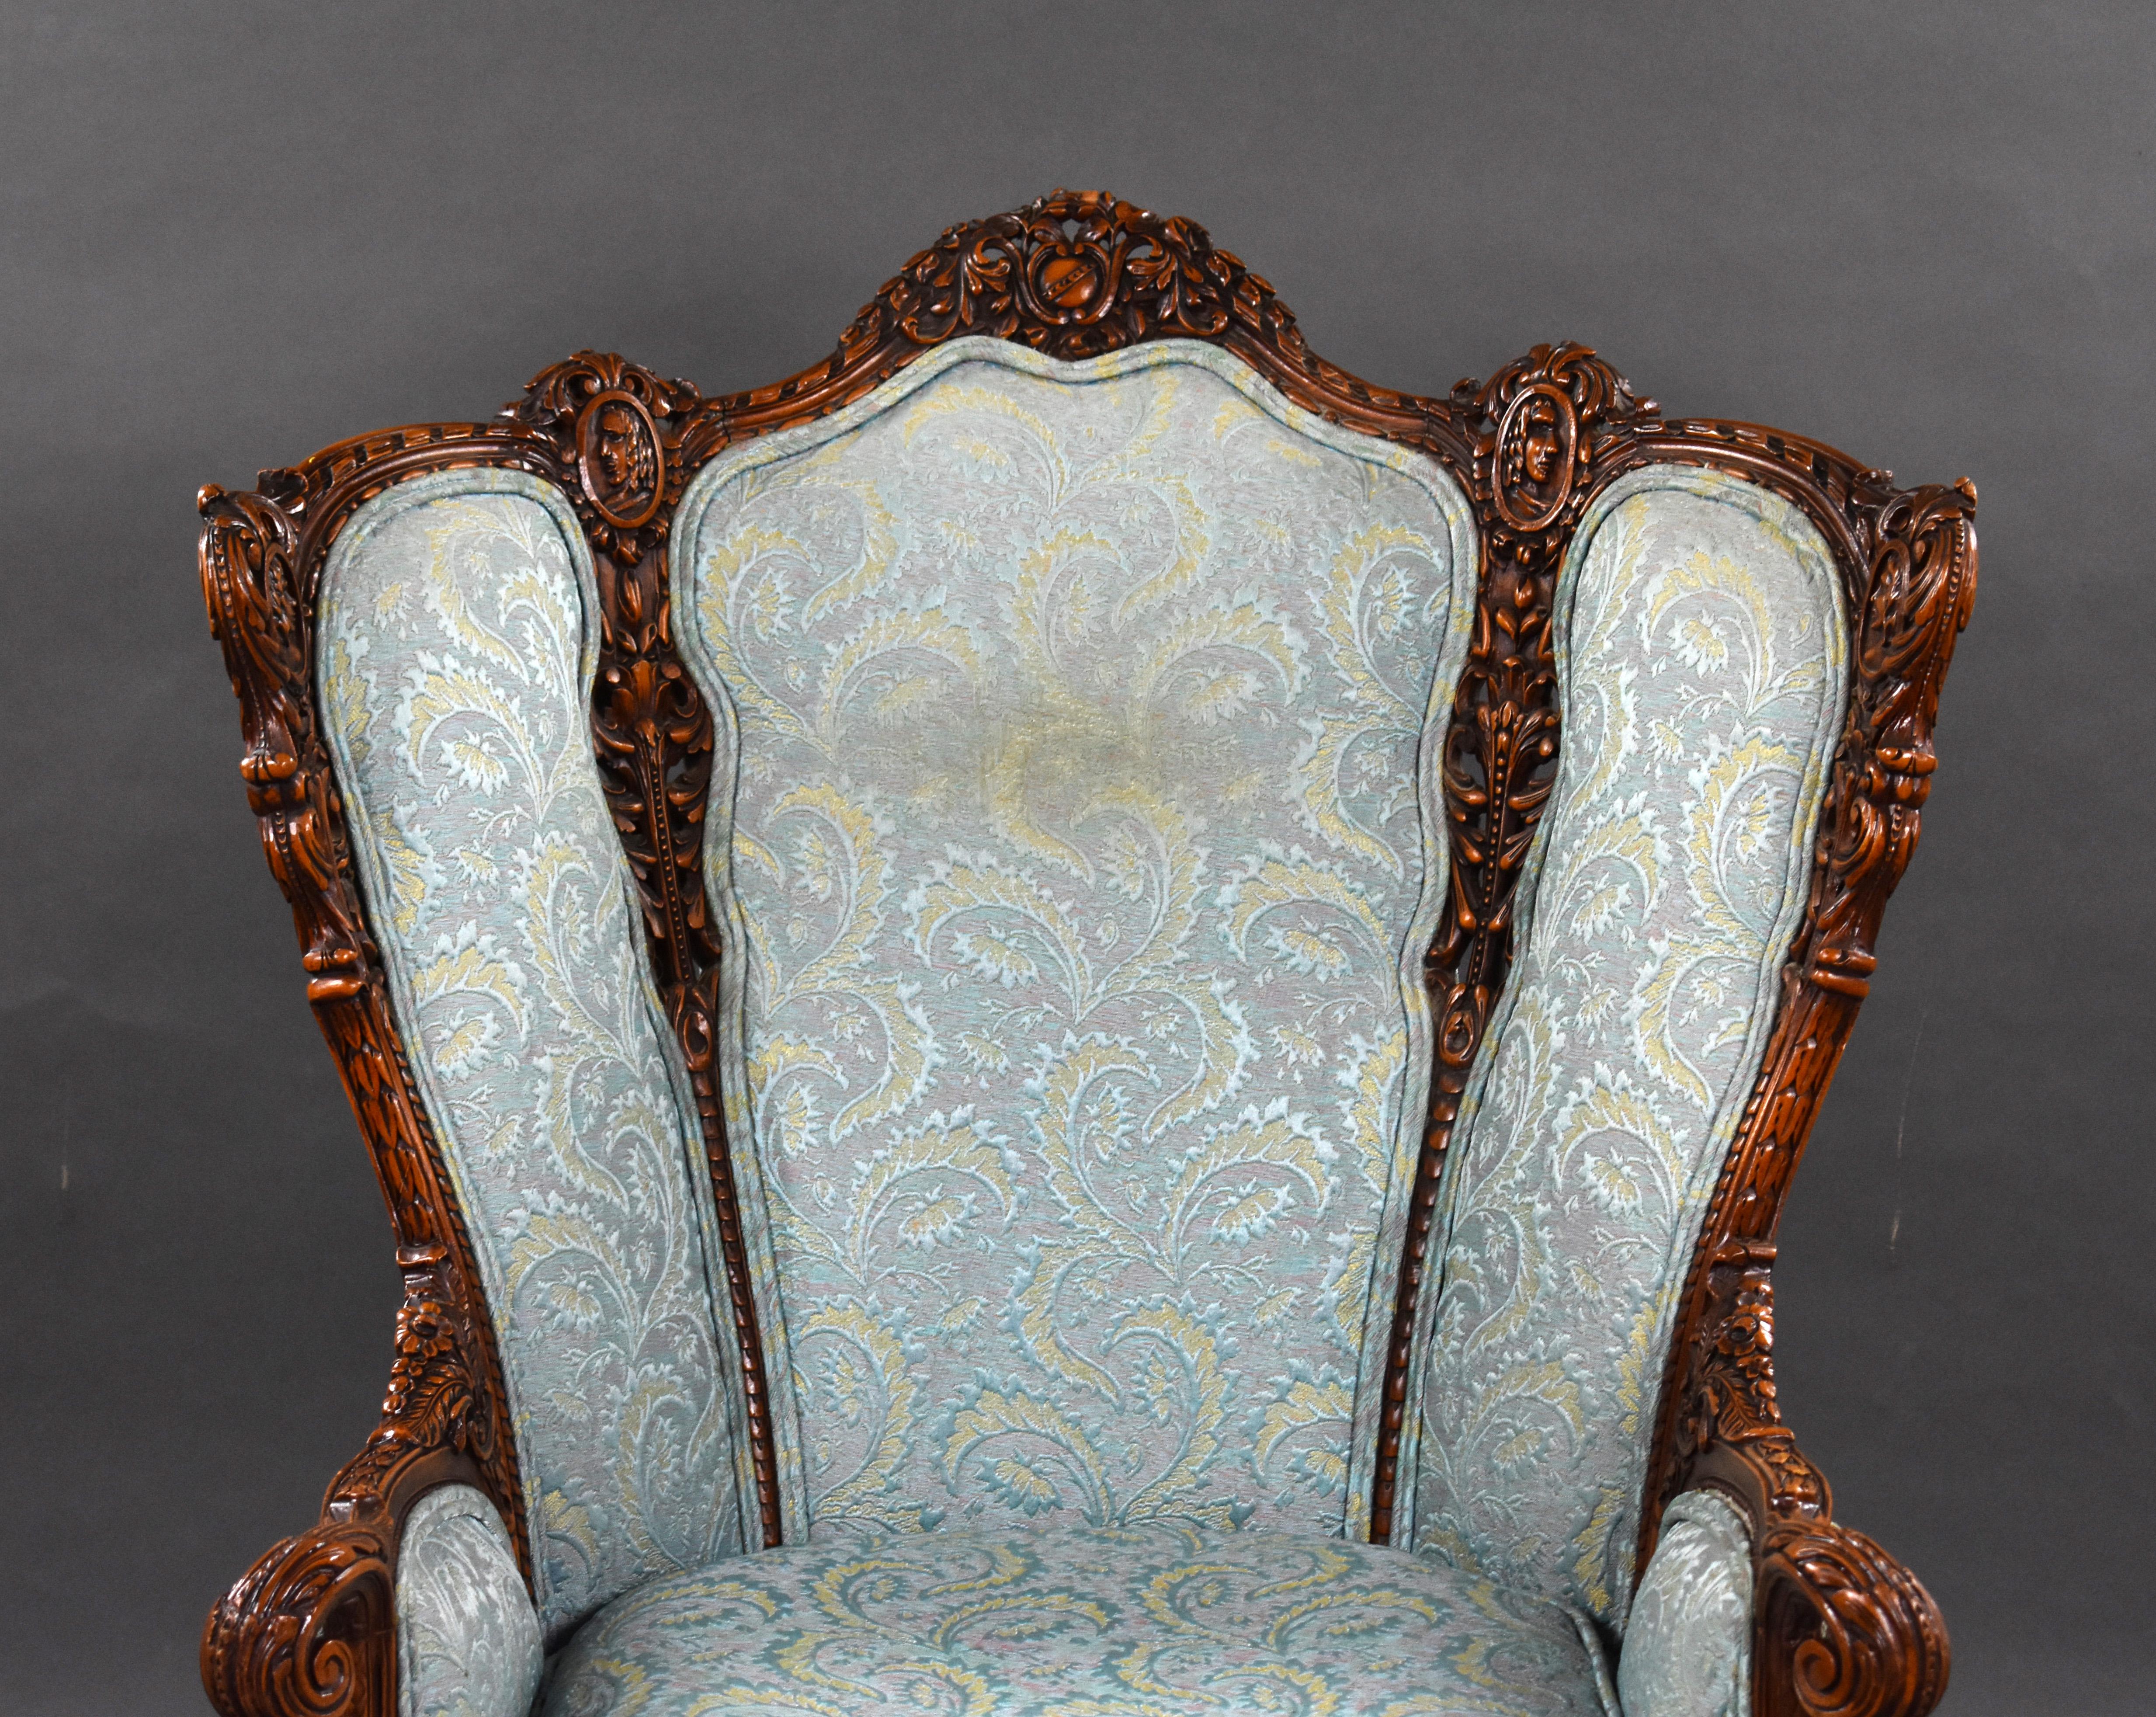 A good quality 19th century walnut armchair of bowed form with ornate ribbon, mask and scroll carved frame and cushion upholstery with out scrolled arms and cabriole legs. 

Measures: Width: 90cm depth: 86cm height: 120cm.